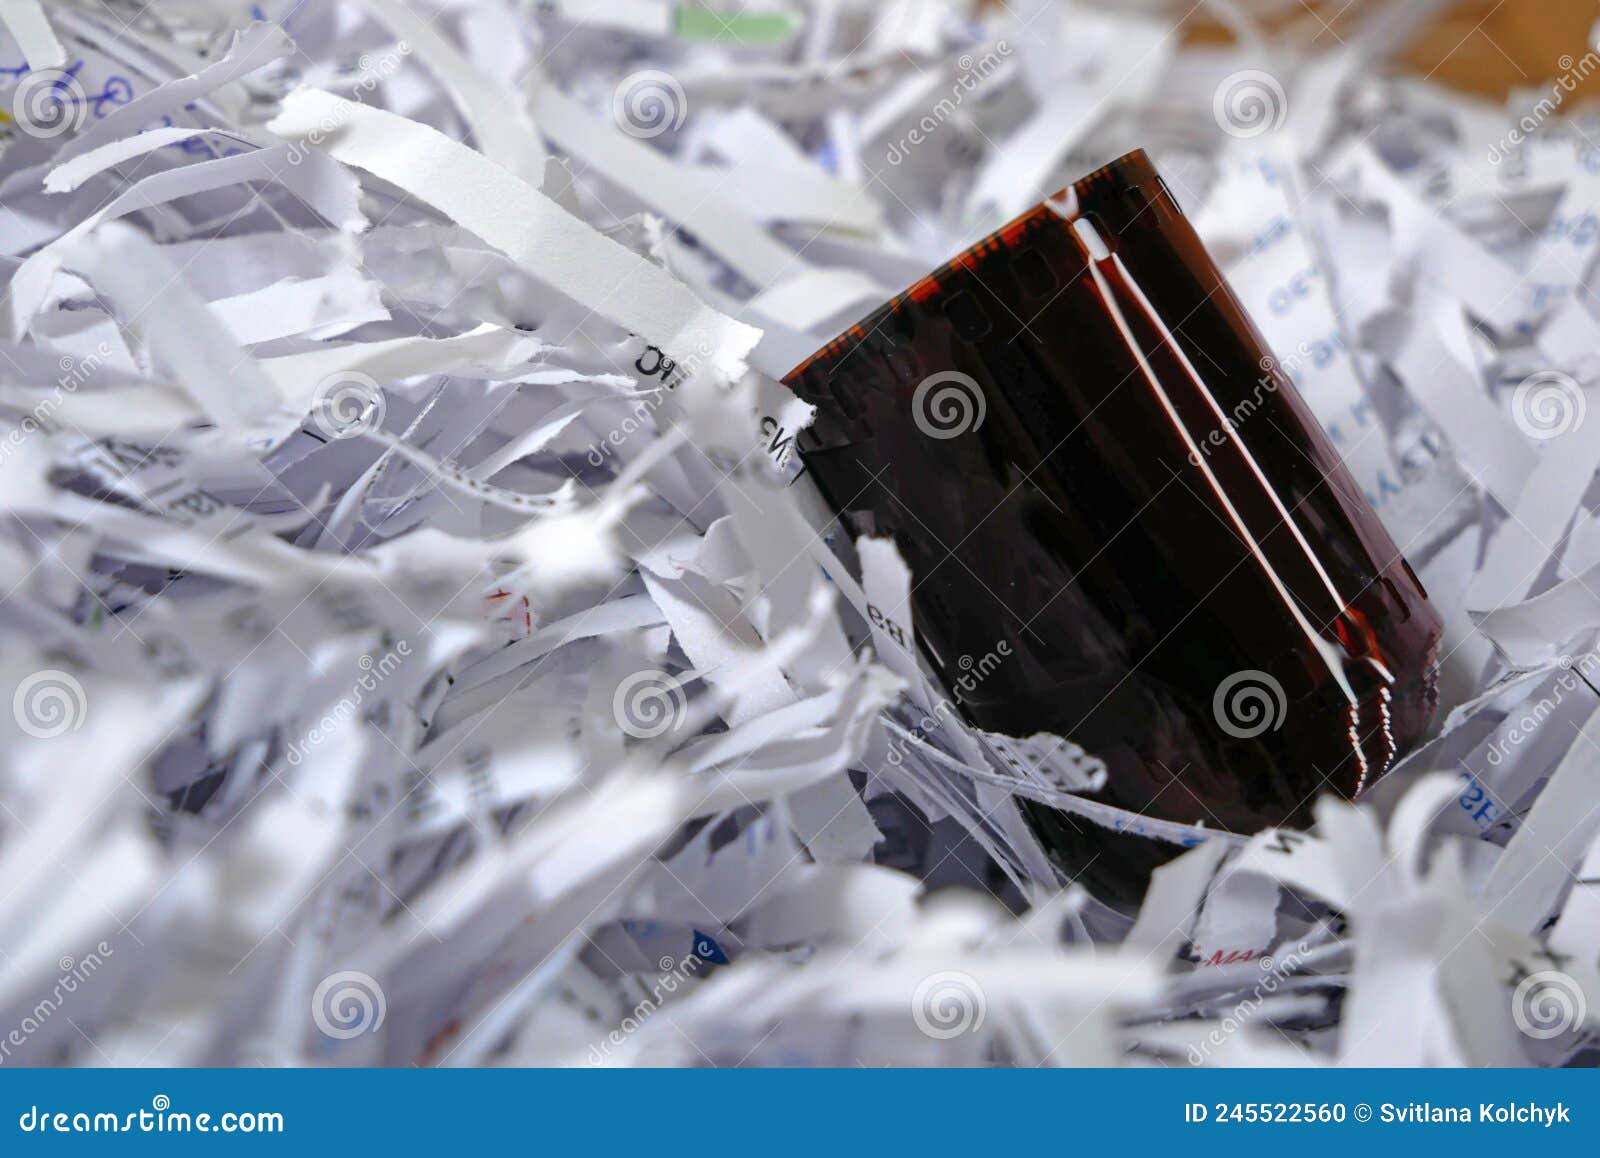 Top Secret Information on Retro Vintage Film for Camera among Shredder Paper and Hand in White Gloves, Thief Information Concept Stock Photo - Image of backup, 245522560